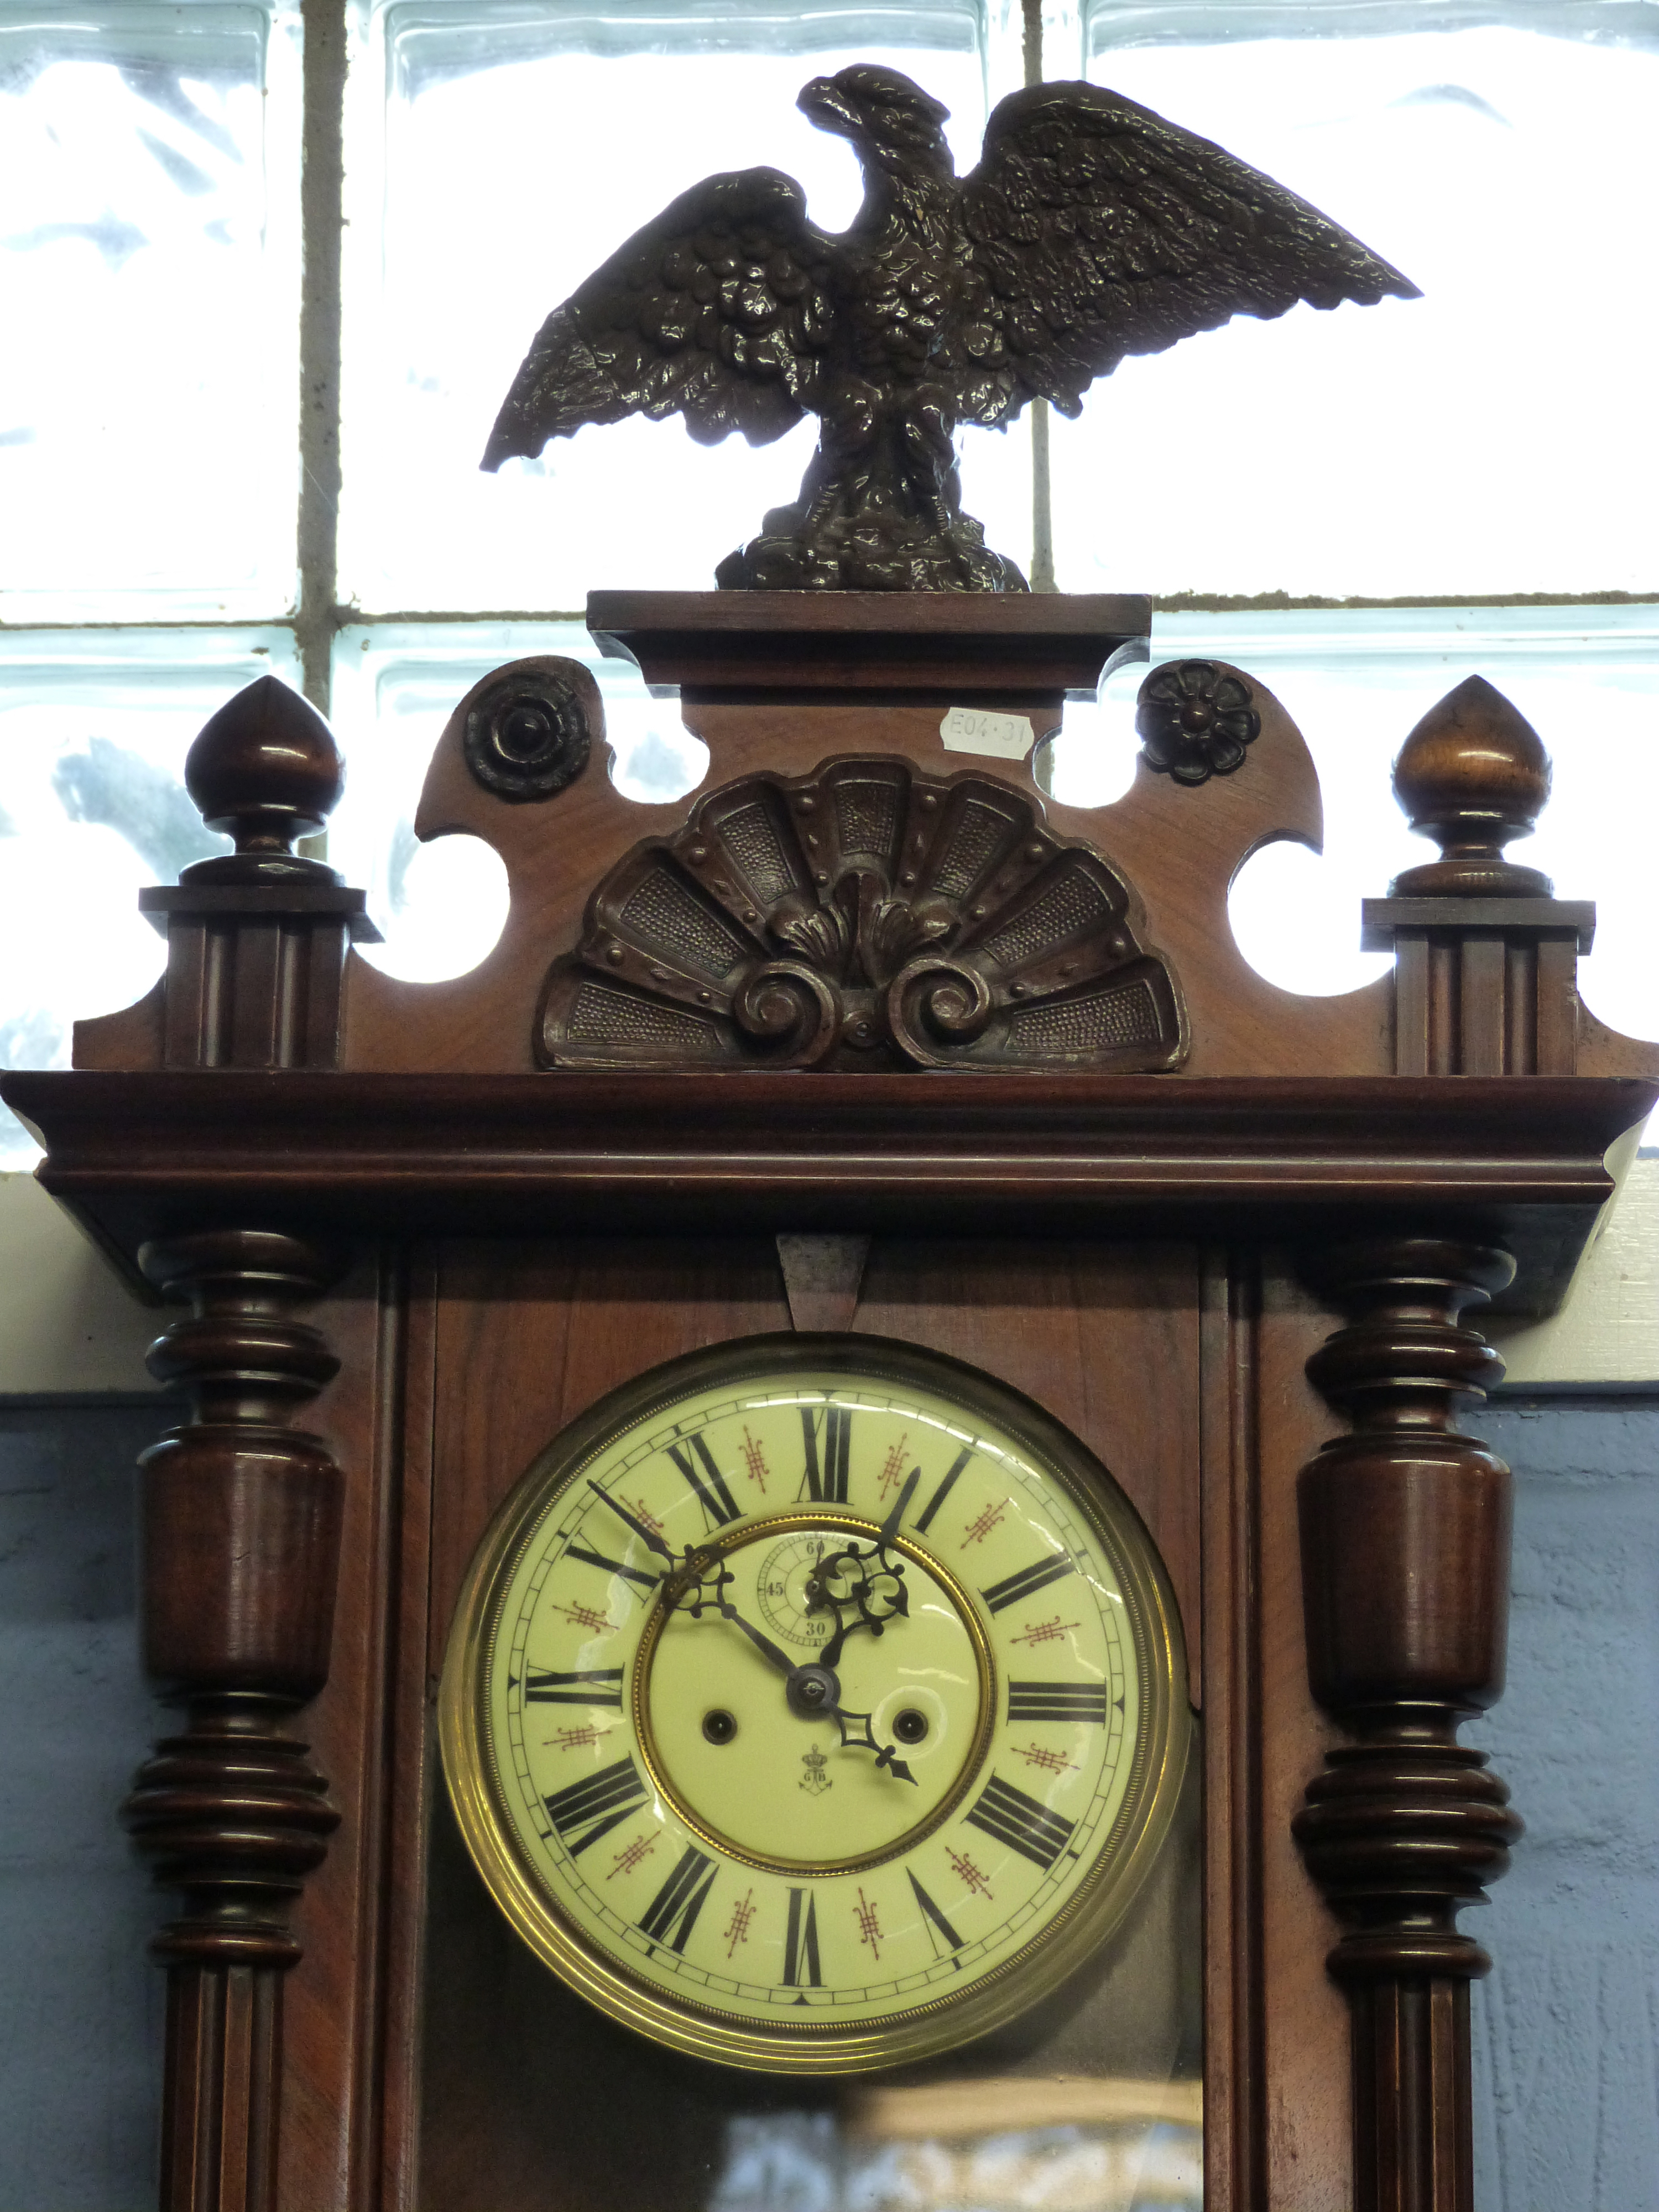 Mahogany cased Vienna type wall clock with eagle crest brass mounted Roman chapter ring within - Image 2 of 2